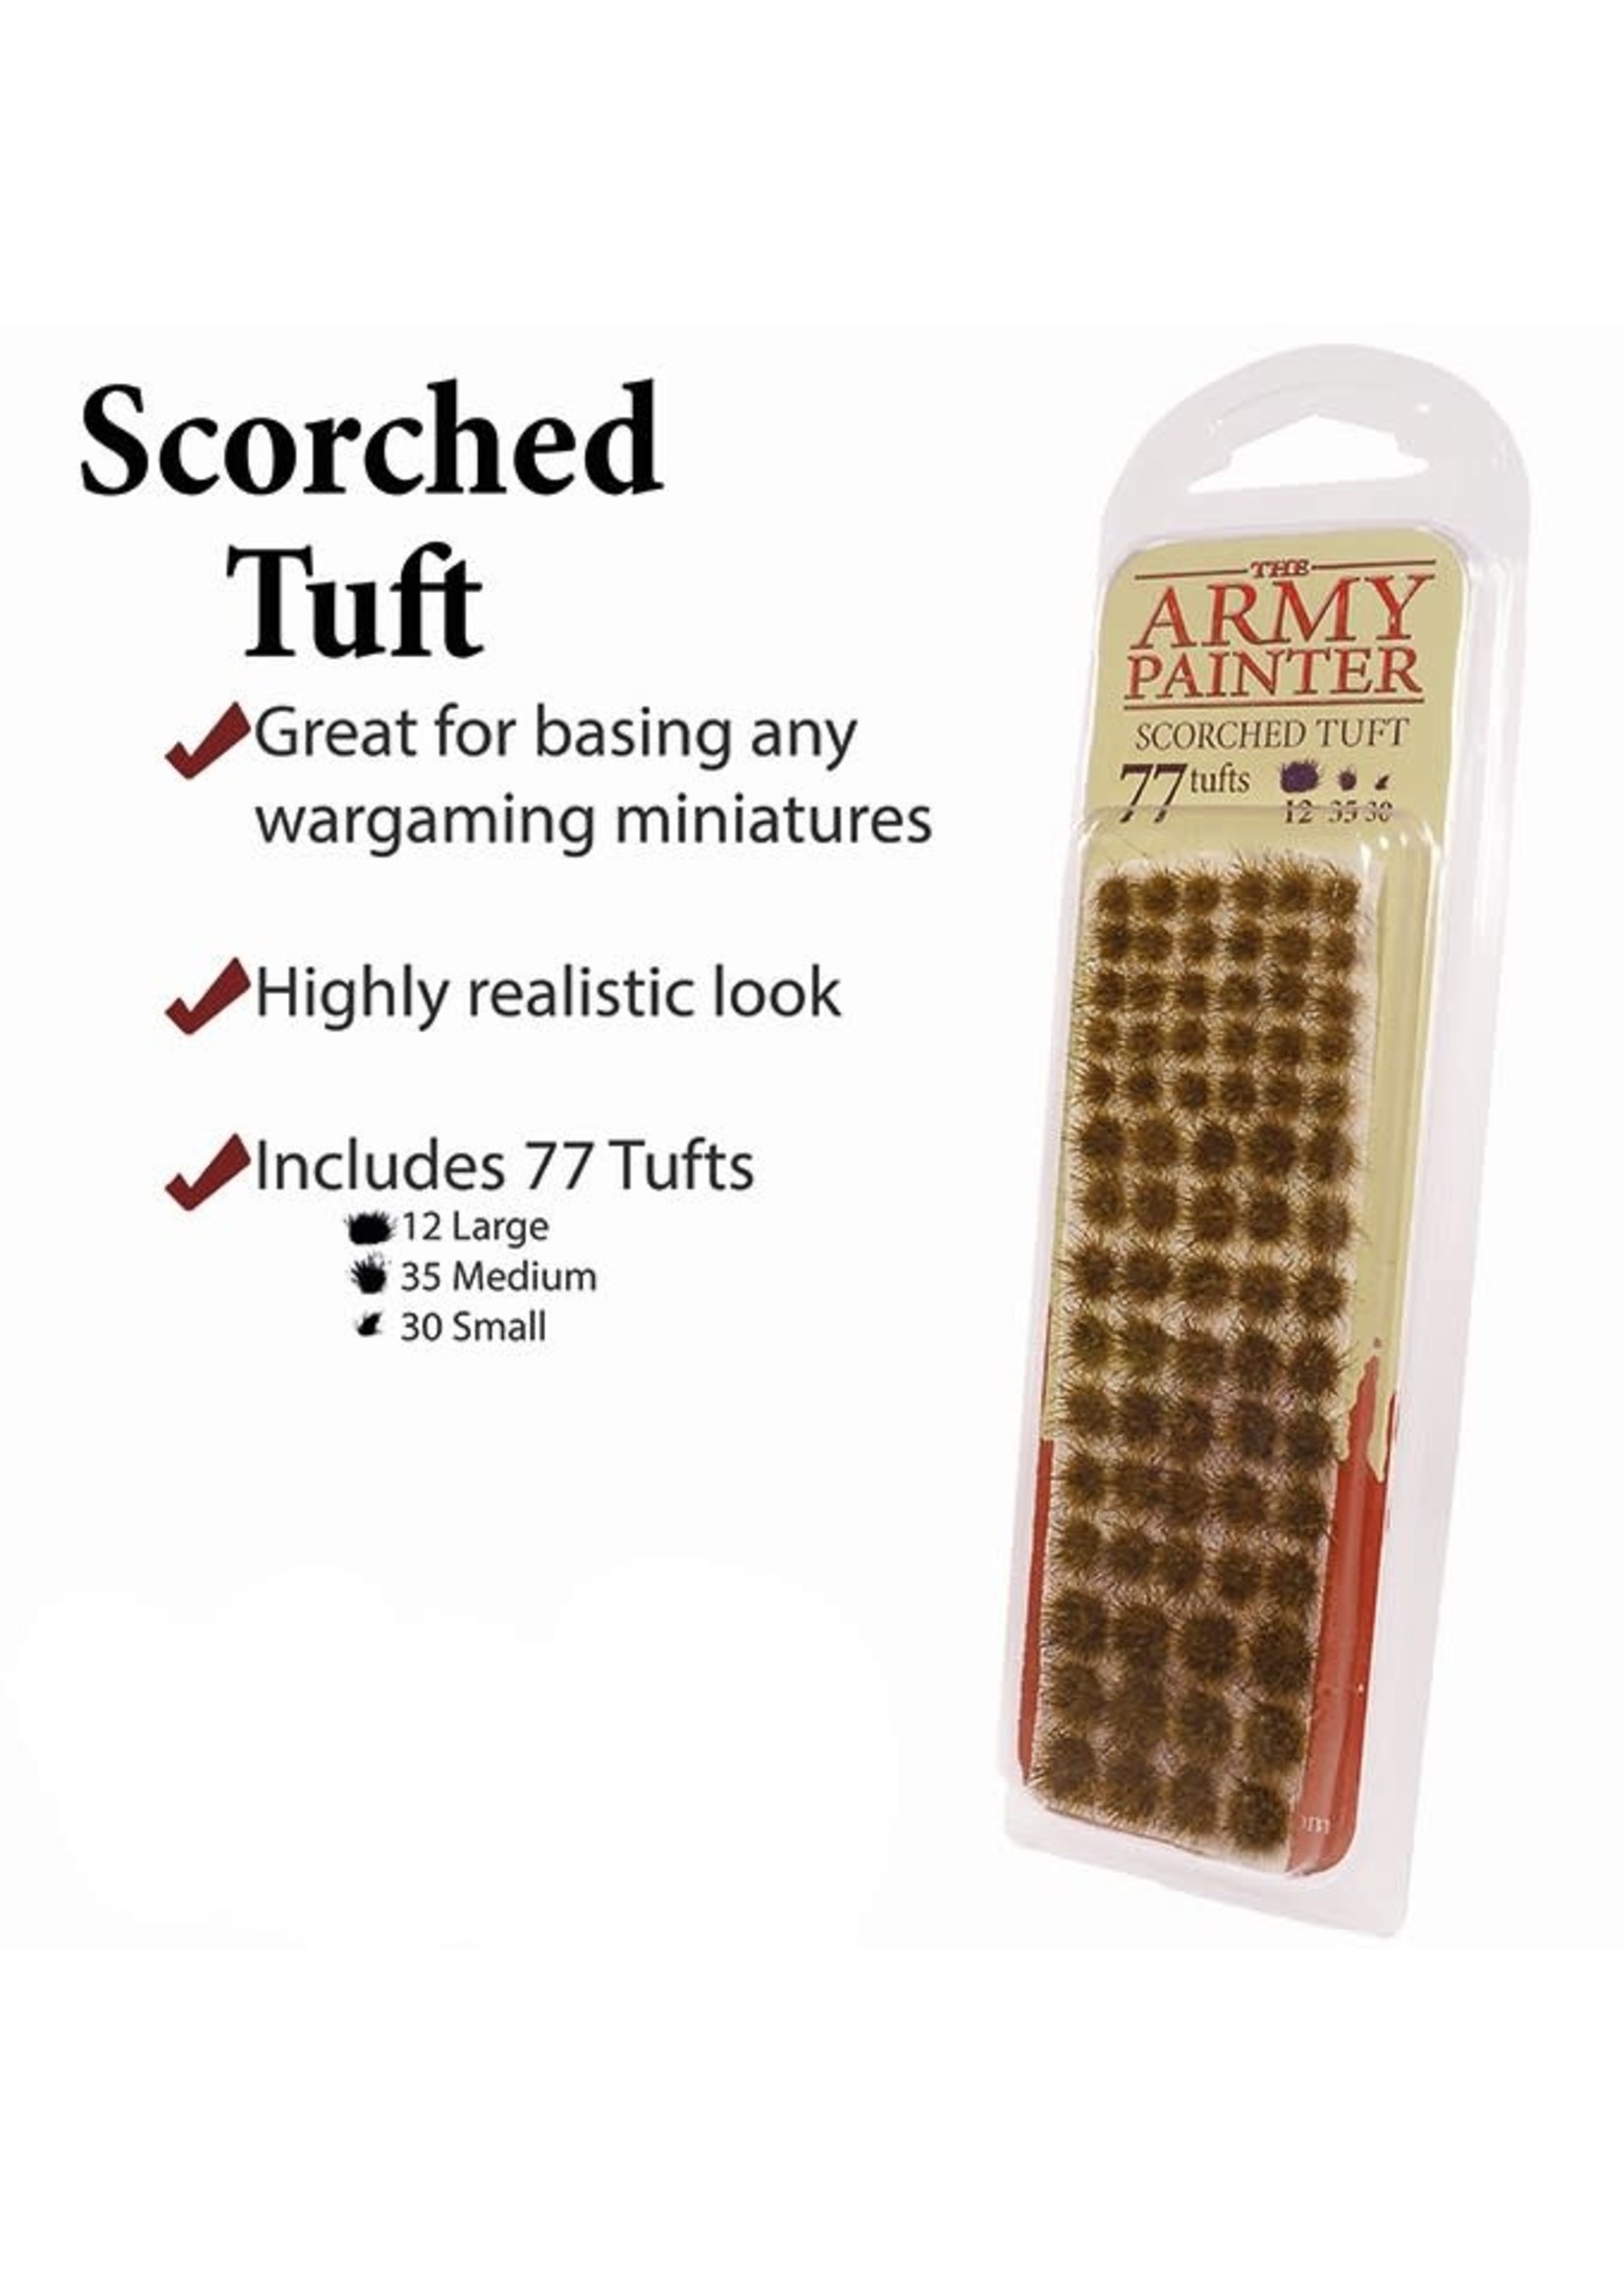 ARMY PAINTER BATTLEFIELD SCORCHED TUFT